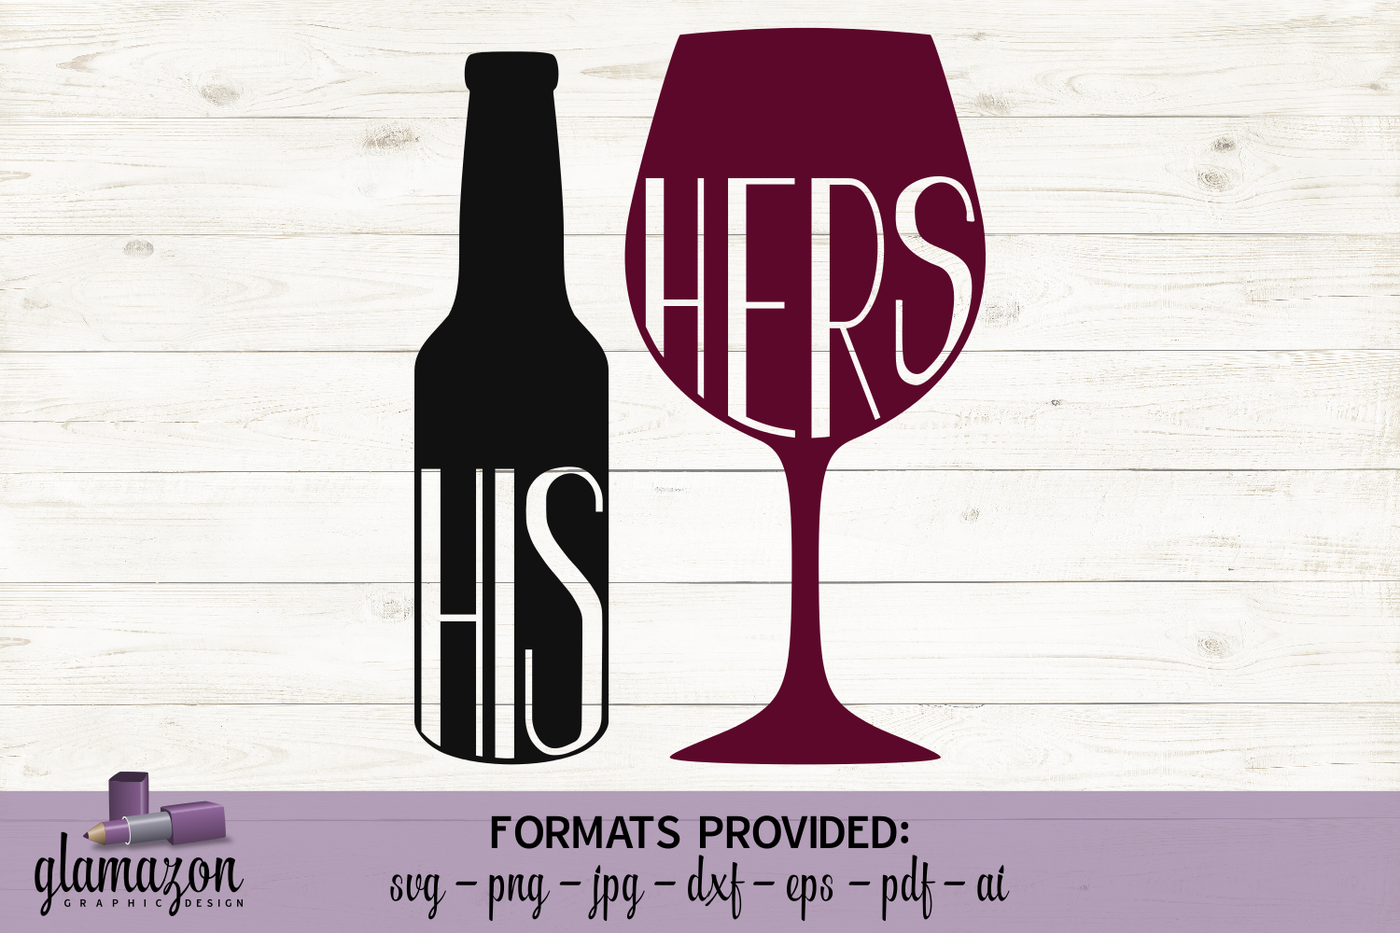 His N Hers Drinks Beer And Wine Svg Dxf Eps Png Pdf Jpg Ai Cutting File By Glamazon Graphics Thehungryjpeg Com